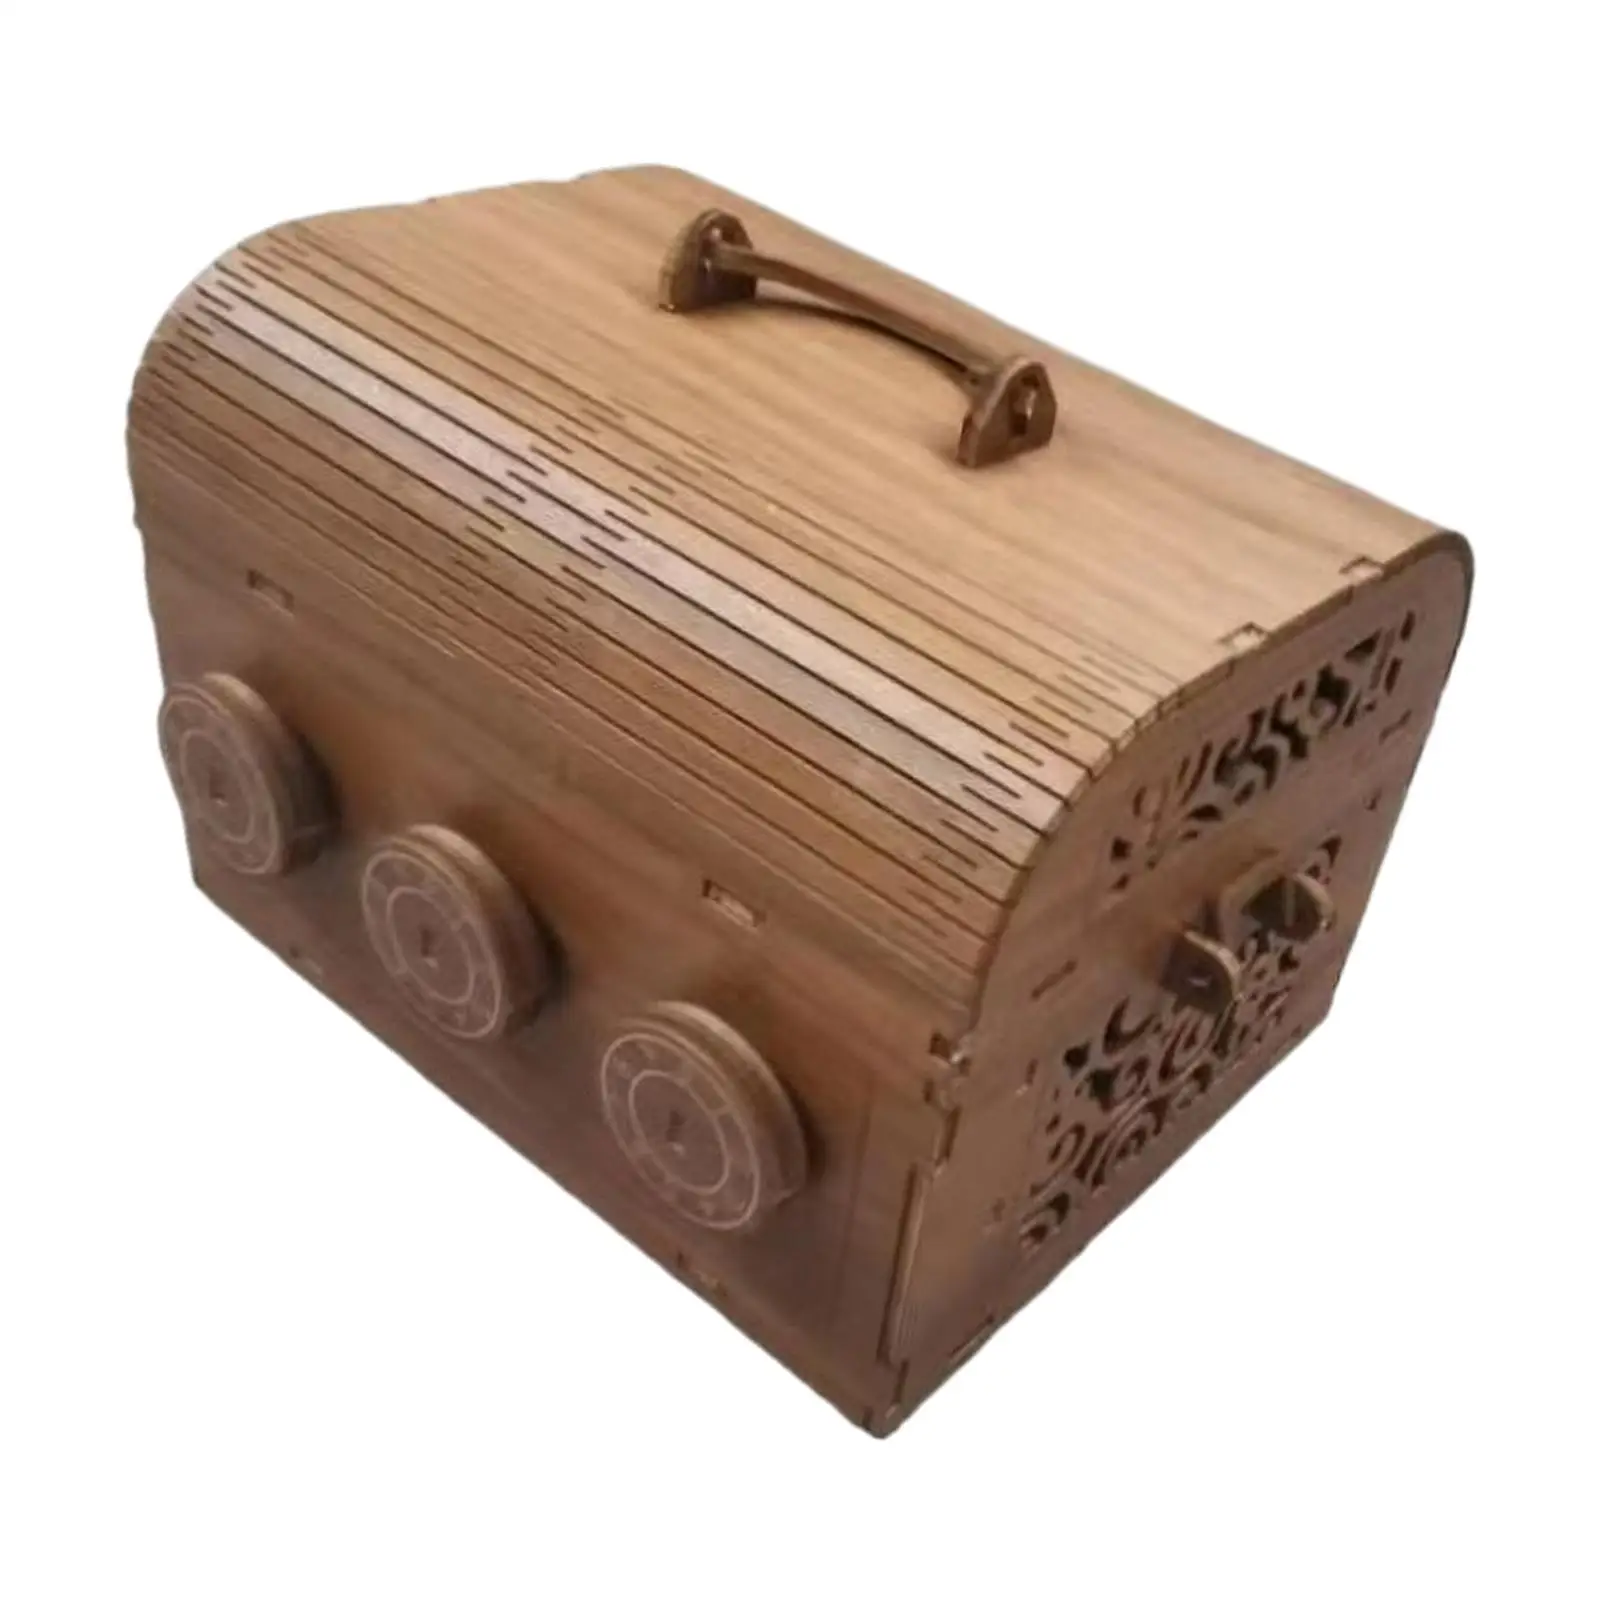 

Wooden Puzzle Box, Brain Teaser Escape Room Game Mechanical Puzzles 3D Puzzle Cluebox Treasure Chest for Party Favor, Teens